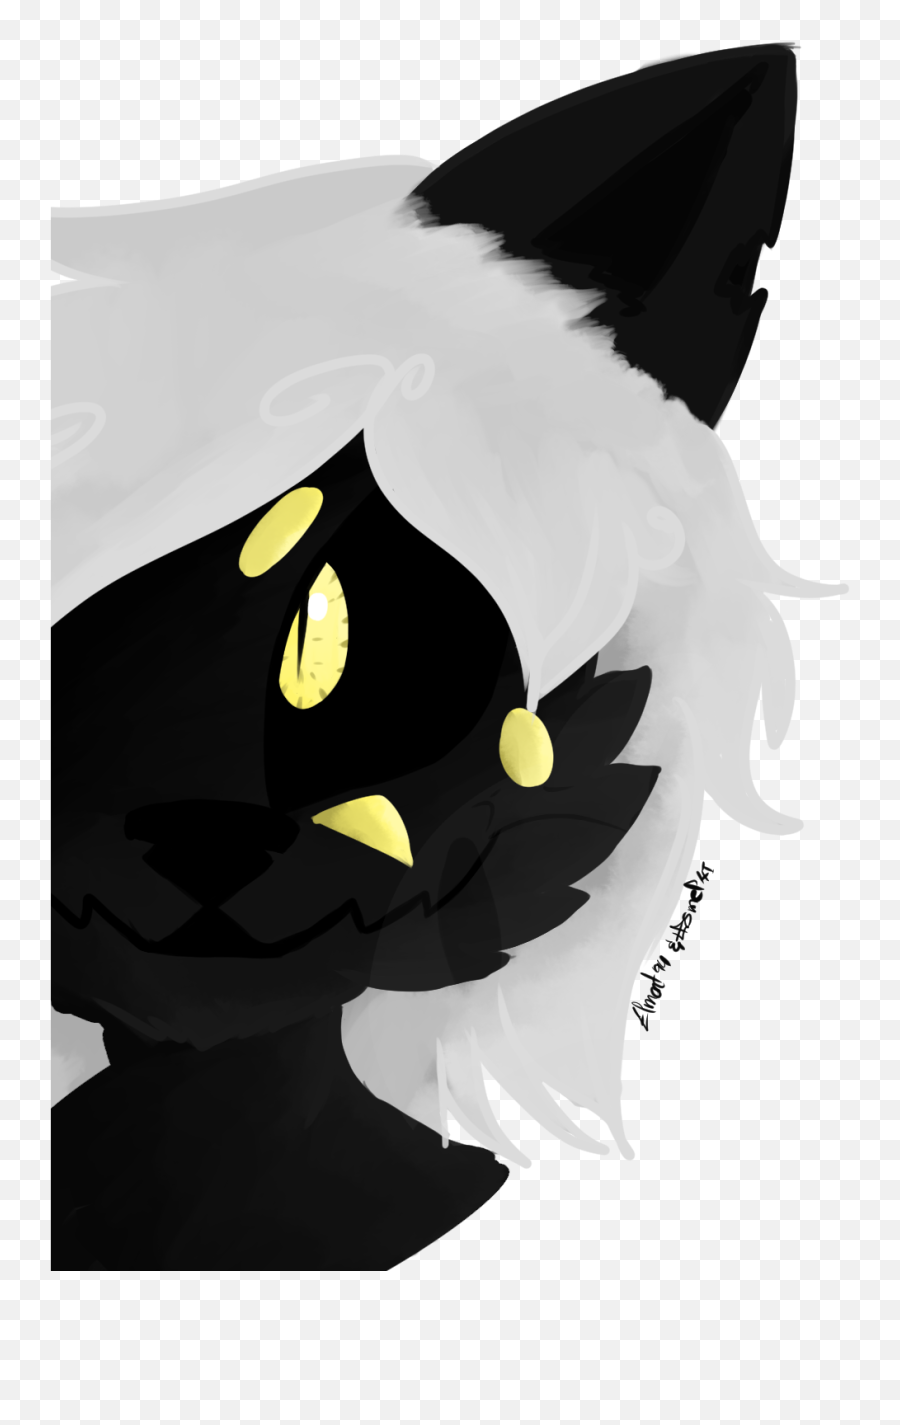 Download Ramm - Skype Icon Black Cat Full Size Png Image Fictional Character,Black Cat Icon